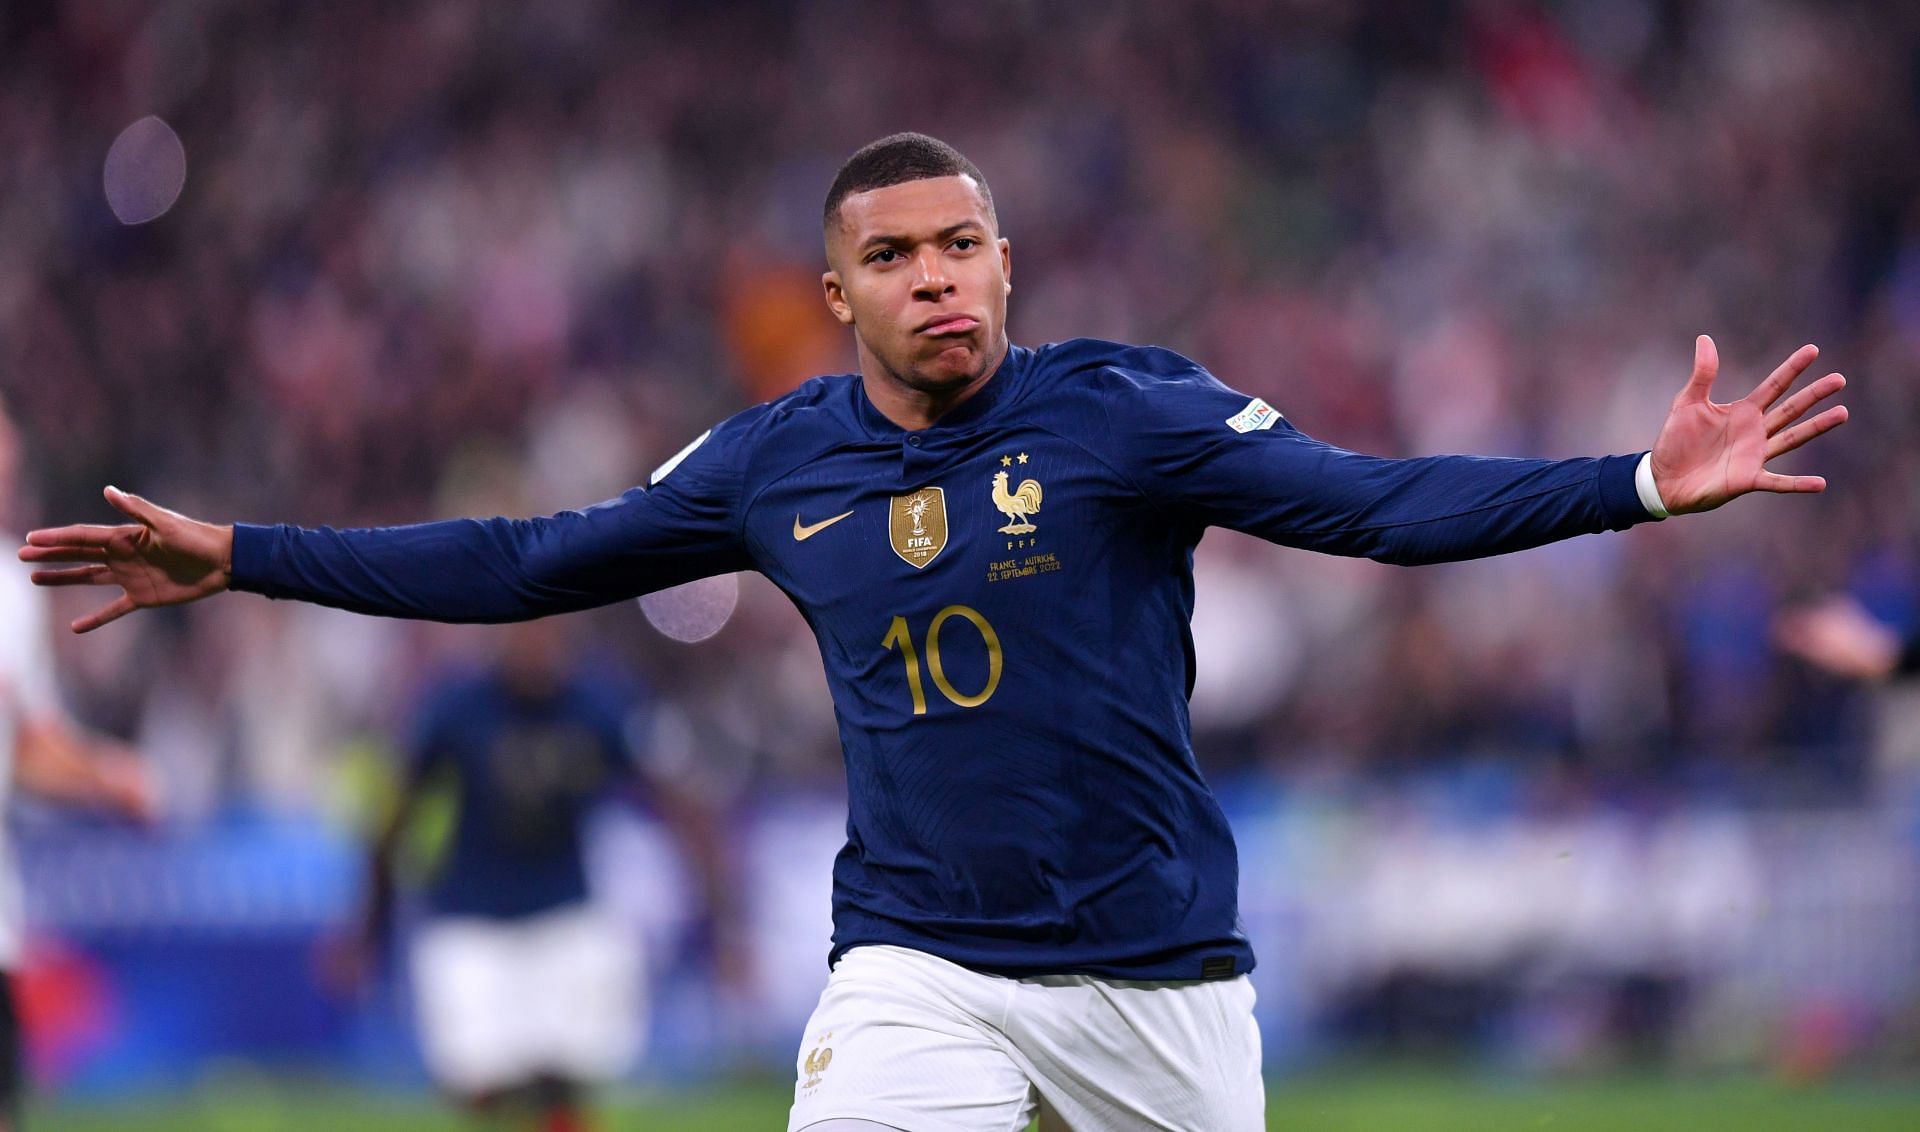 Kylian Mbappe has been impressive for club and country in recent times